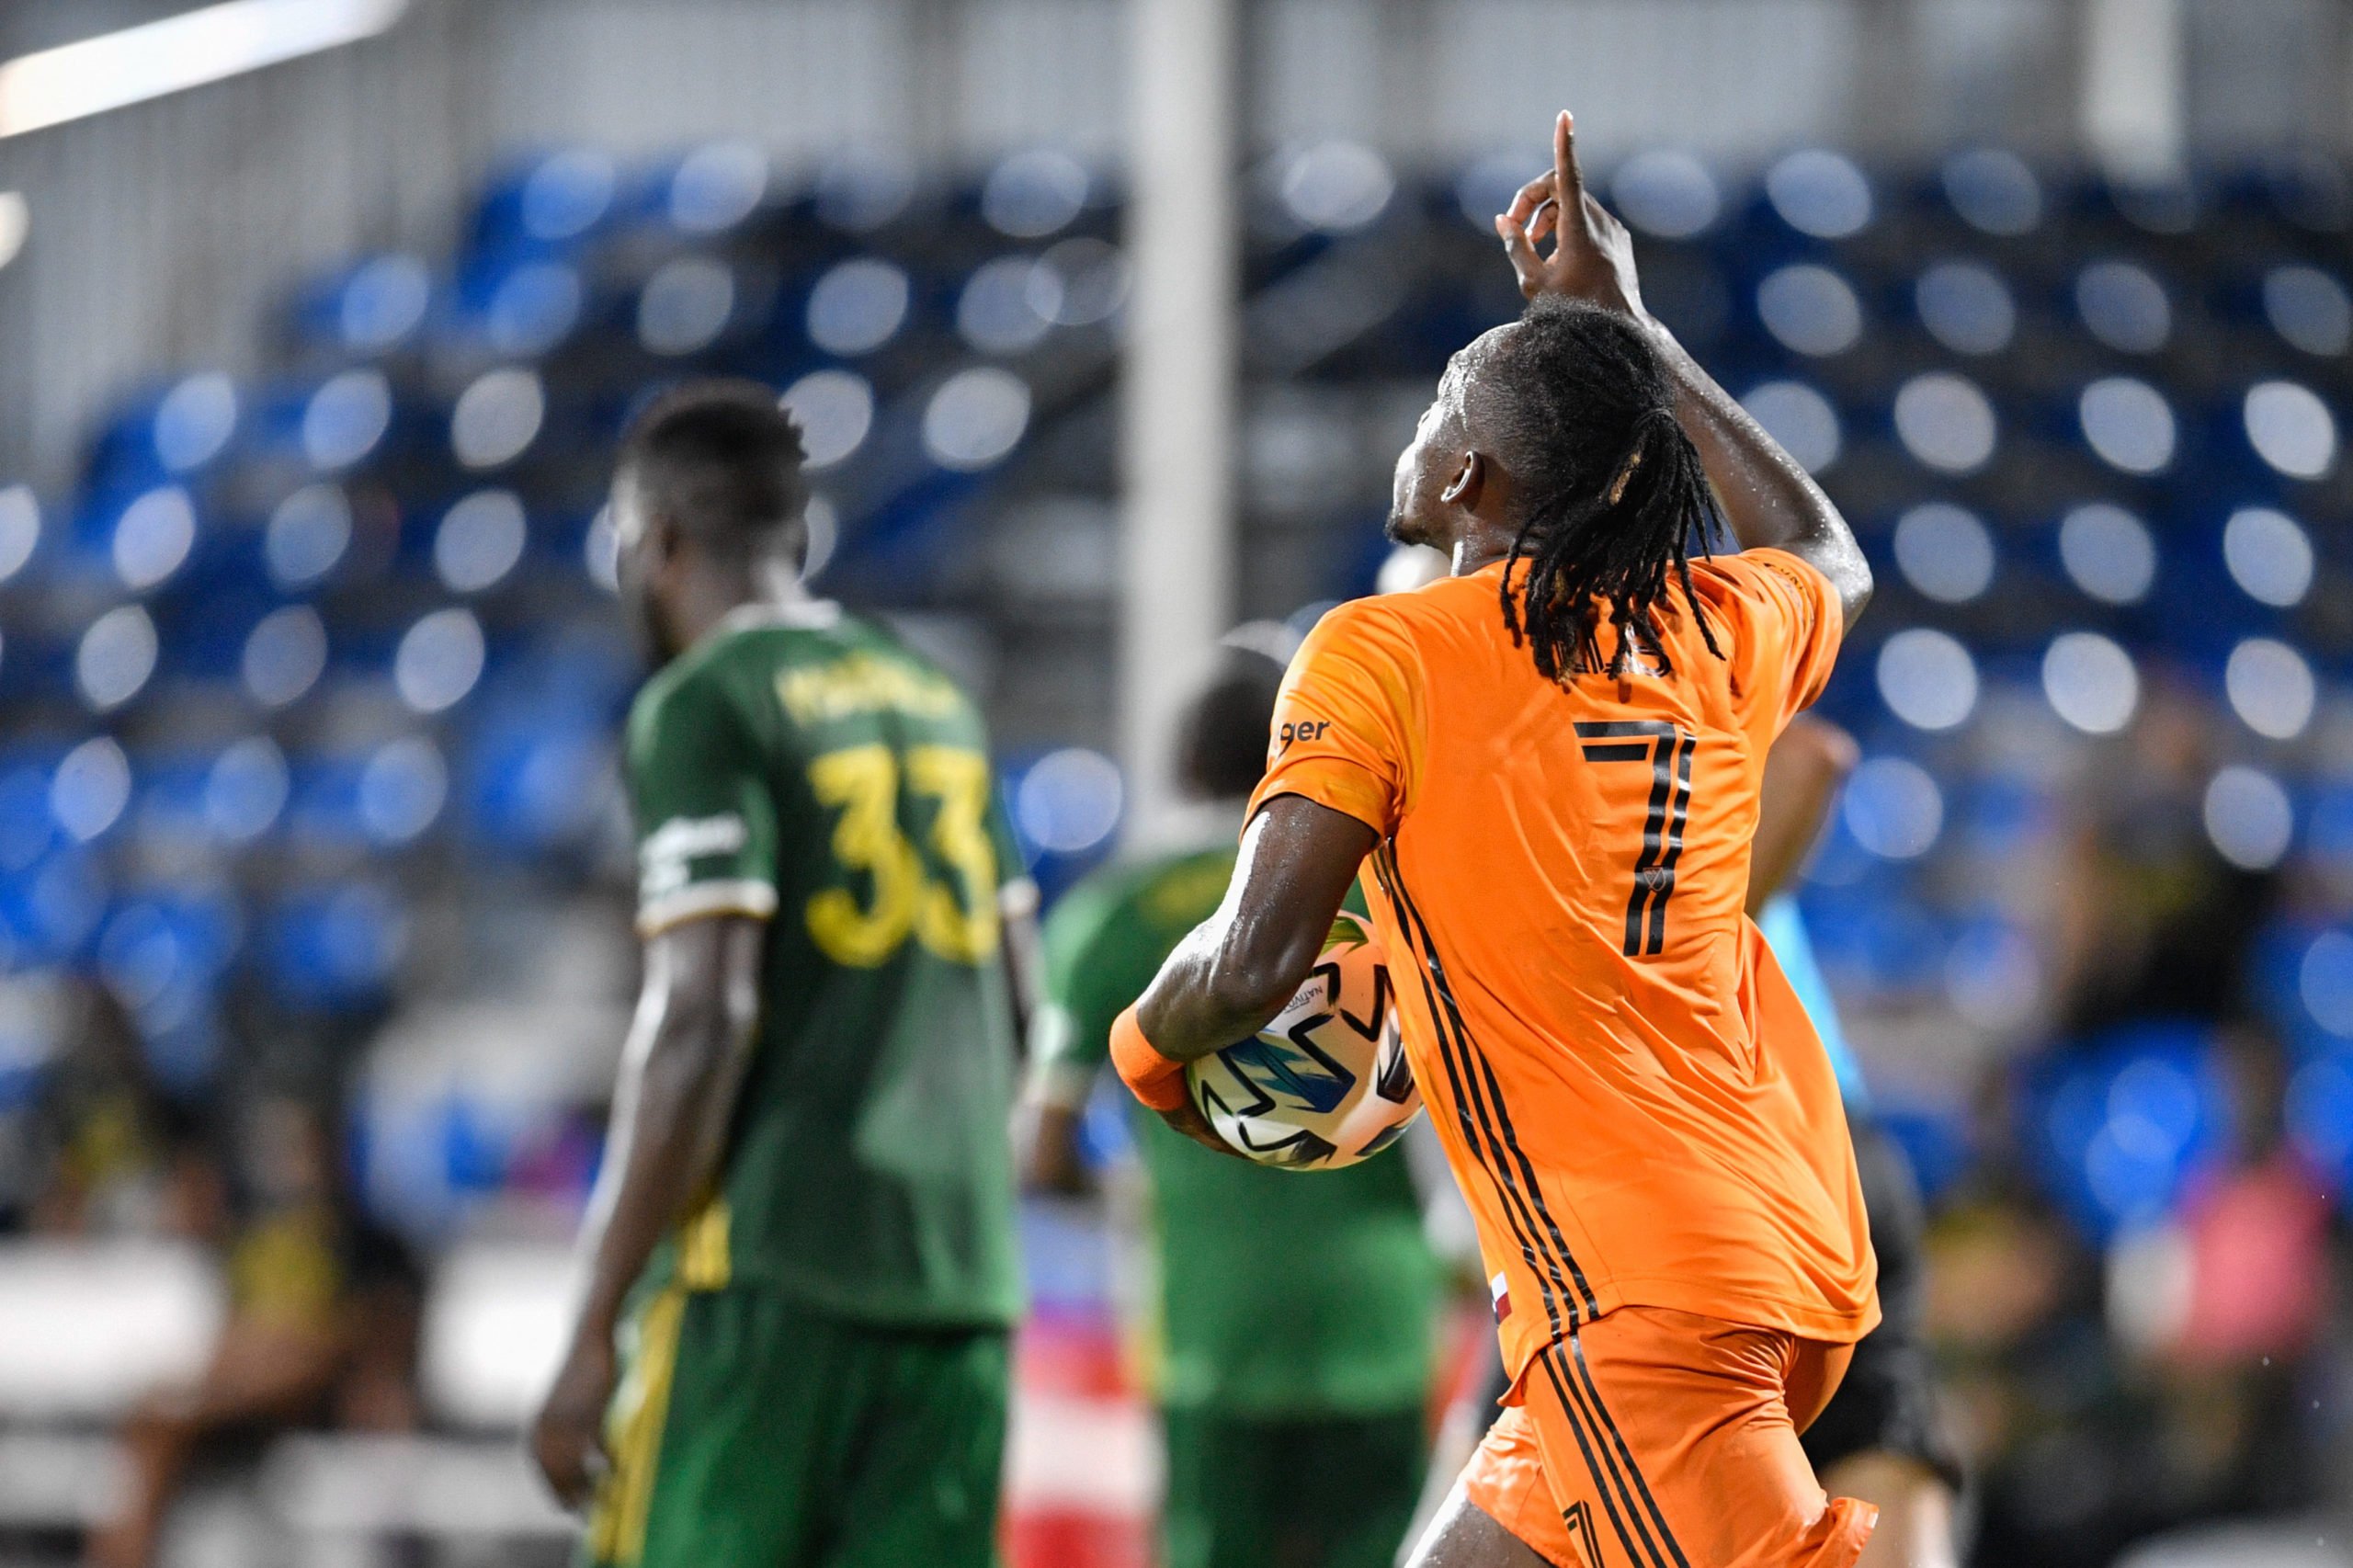 The time is right for Celtic to move for Houston Dynamo winger Alberth Elis